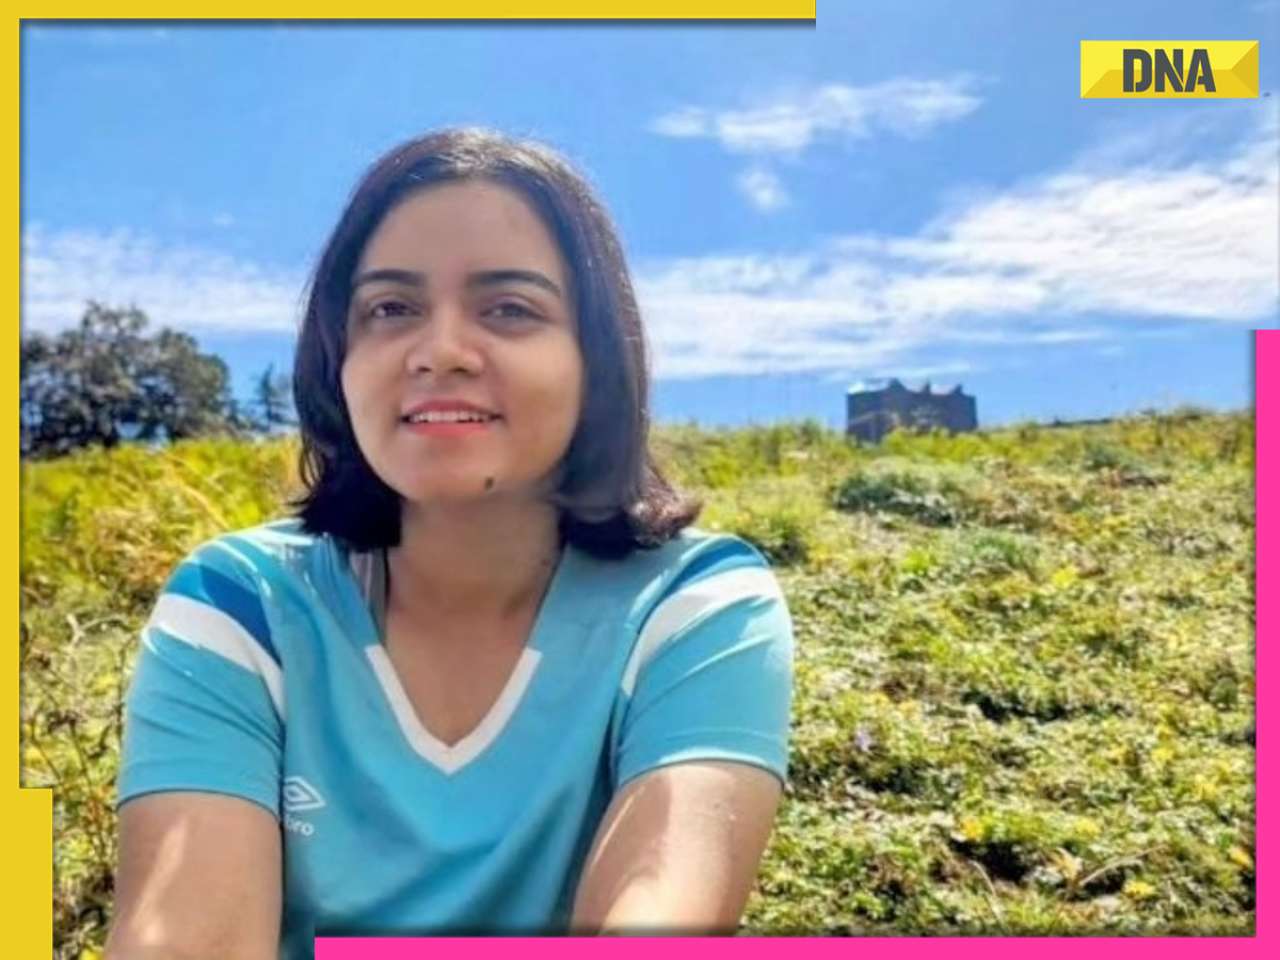 Meet woman who cleared UPSC exam at 21, bagged AIR 13 but didn't become IAS due to...